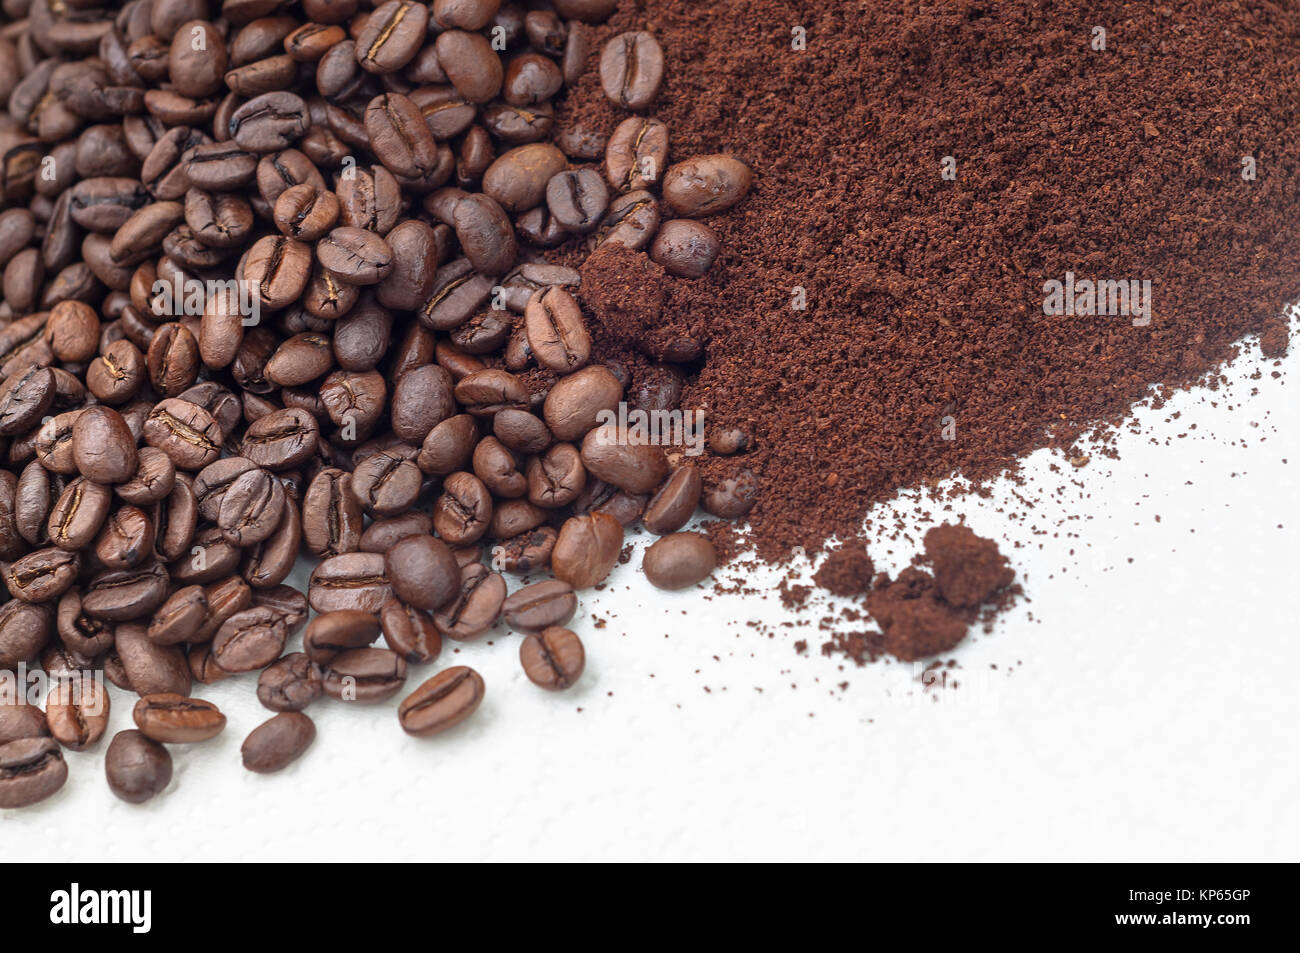 coffee beans and ground coffee on a white background,decorative and striking,space for text,extendable down Stock Photo